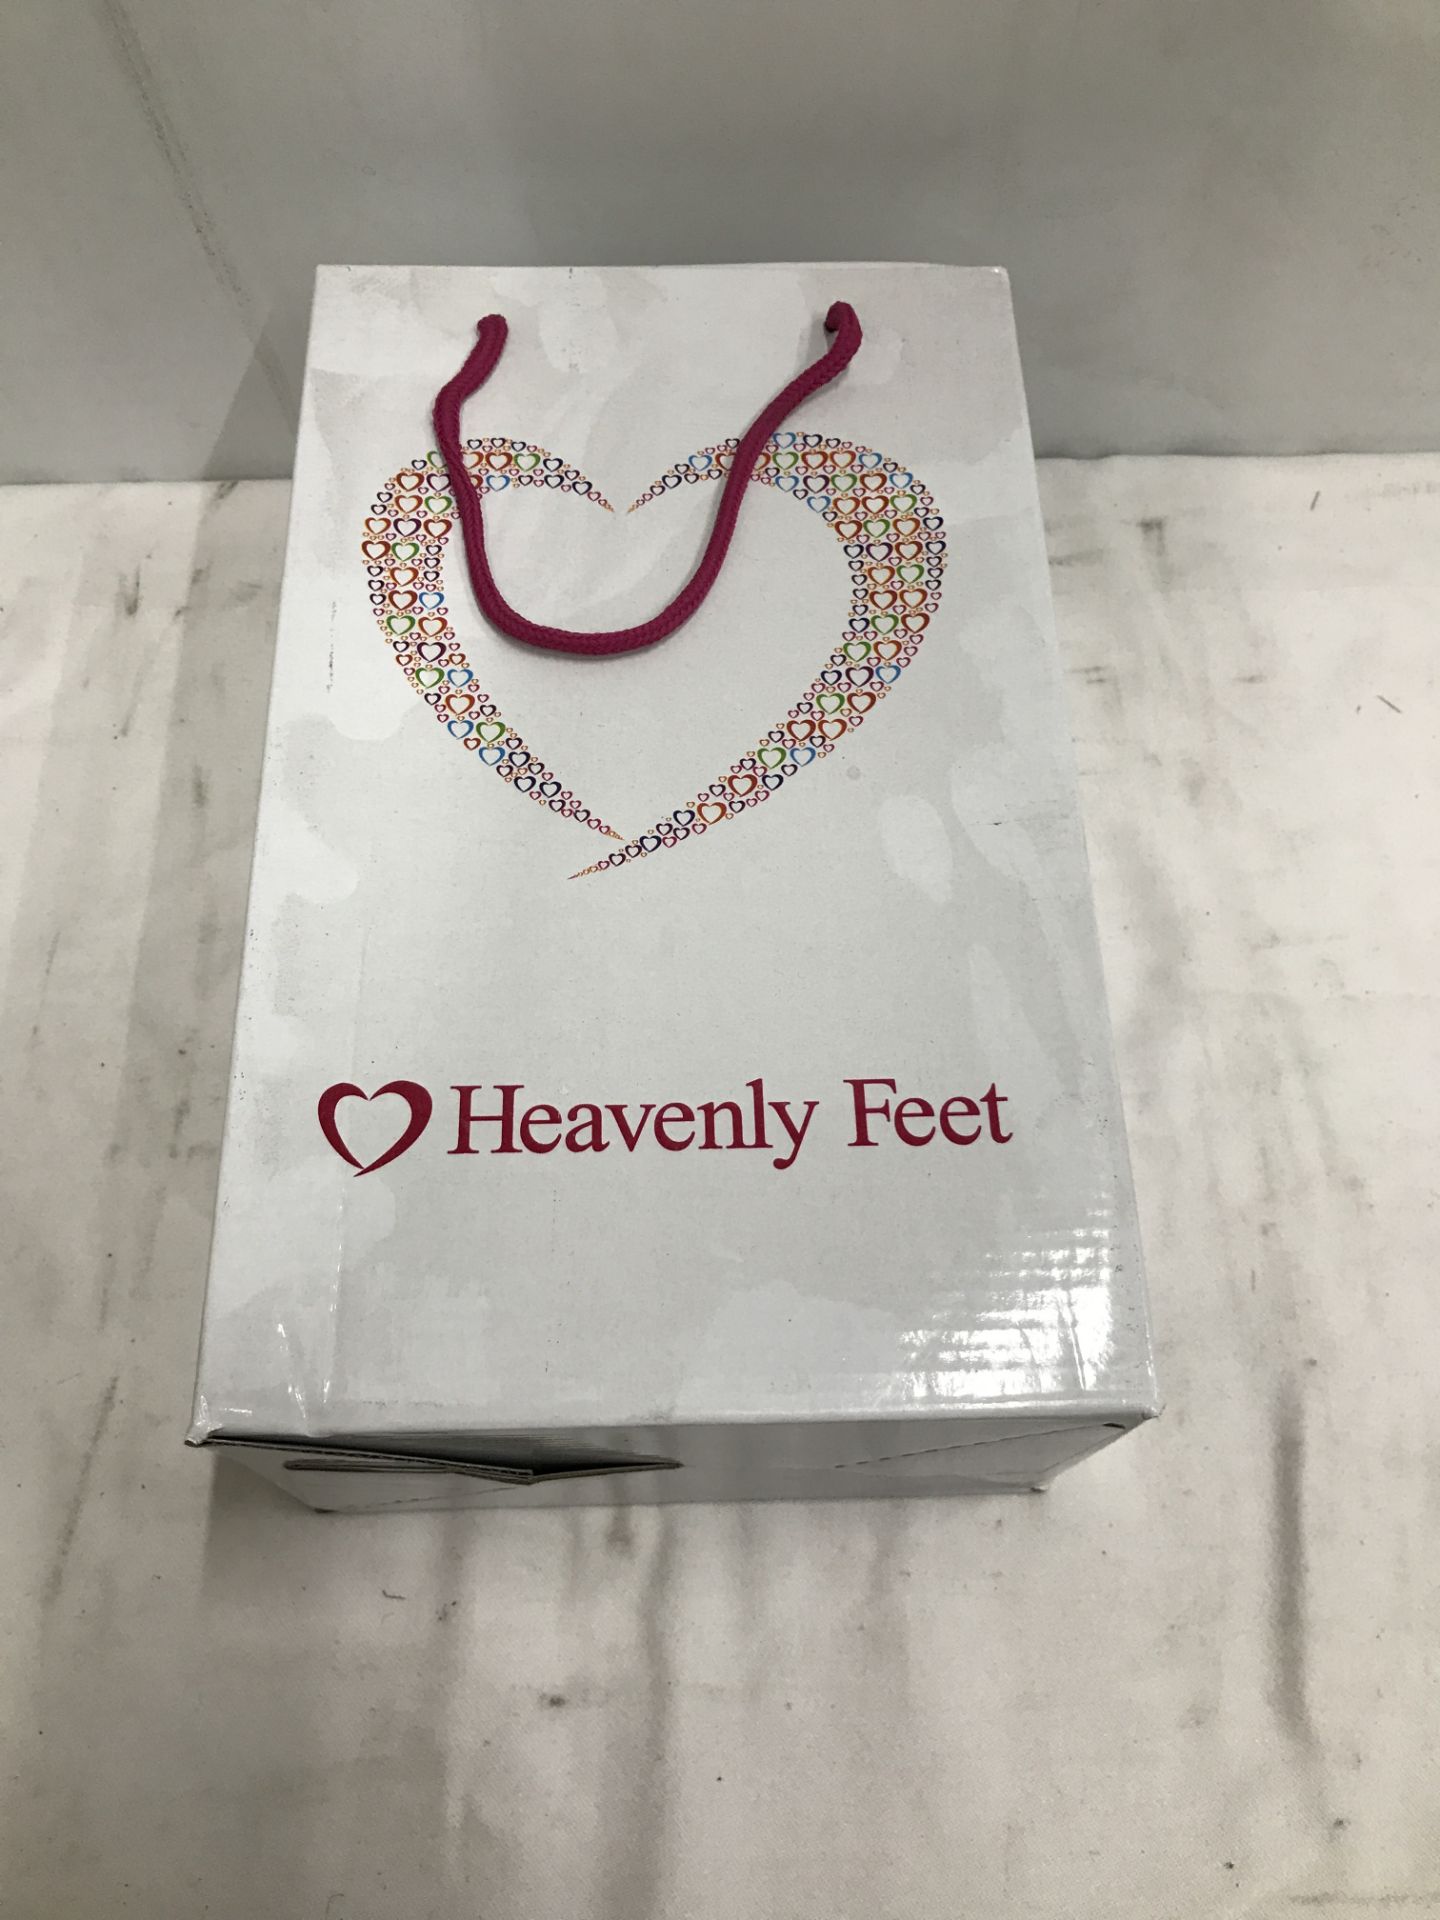 9 x Pairs of Heavenly Feet Ladies Shoes - Image 4 of 4